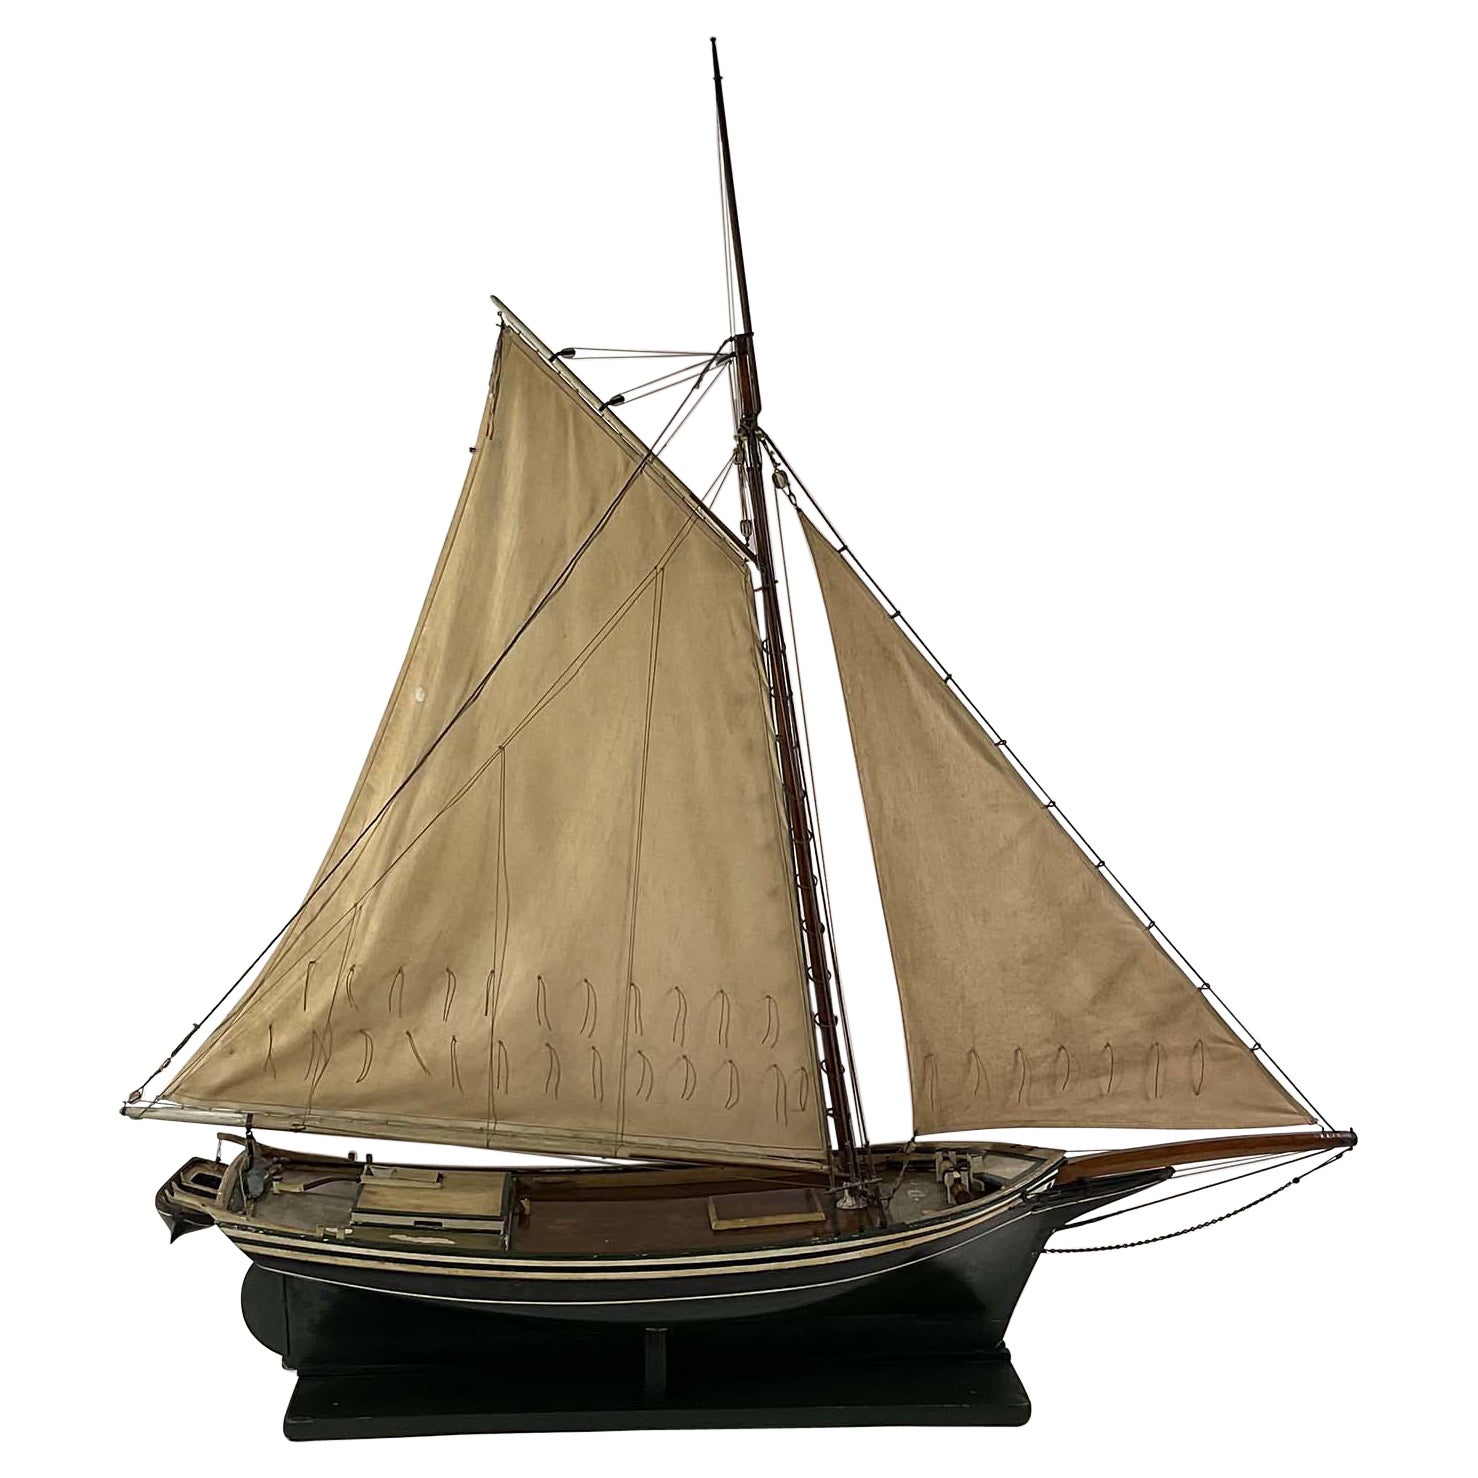 Model of the Oyster Sloop Fanny Fern of Quincy Mass